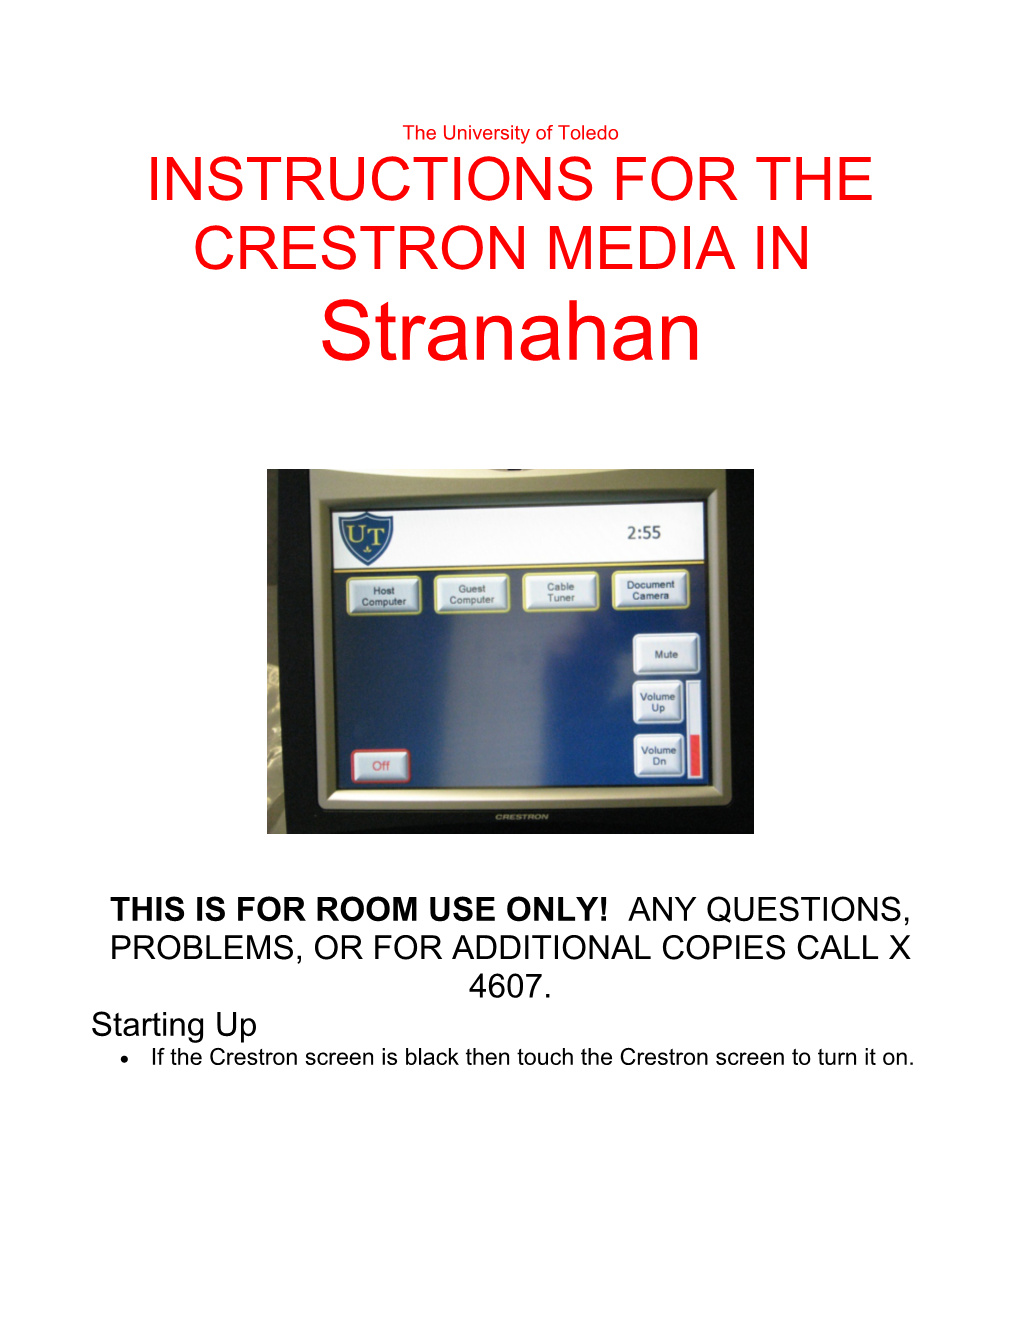 Instructions for the New Crestron Media in Stranahan